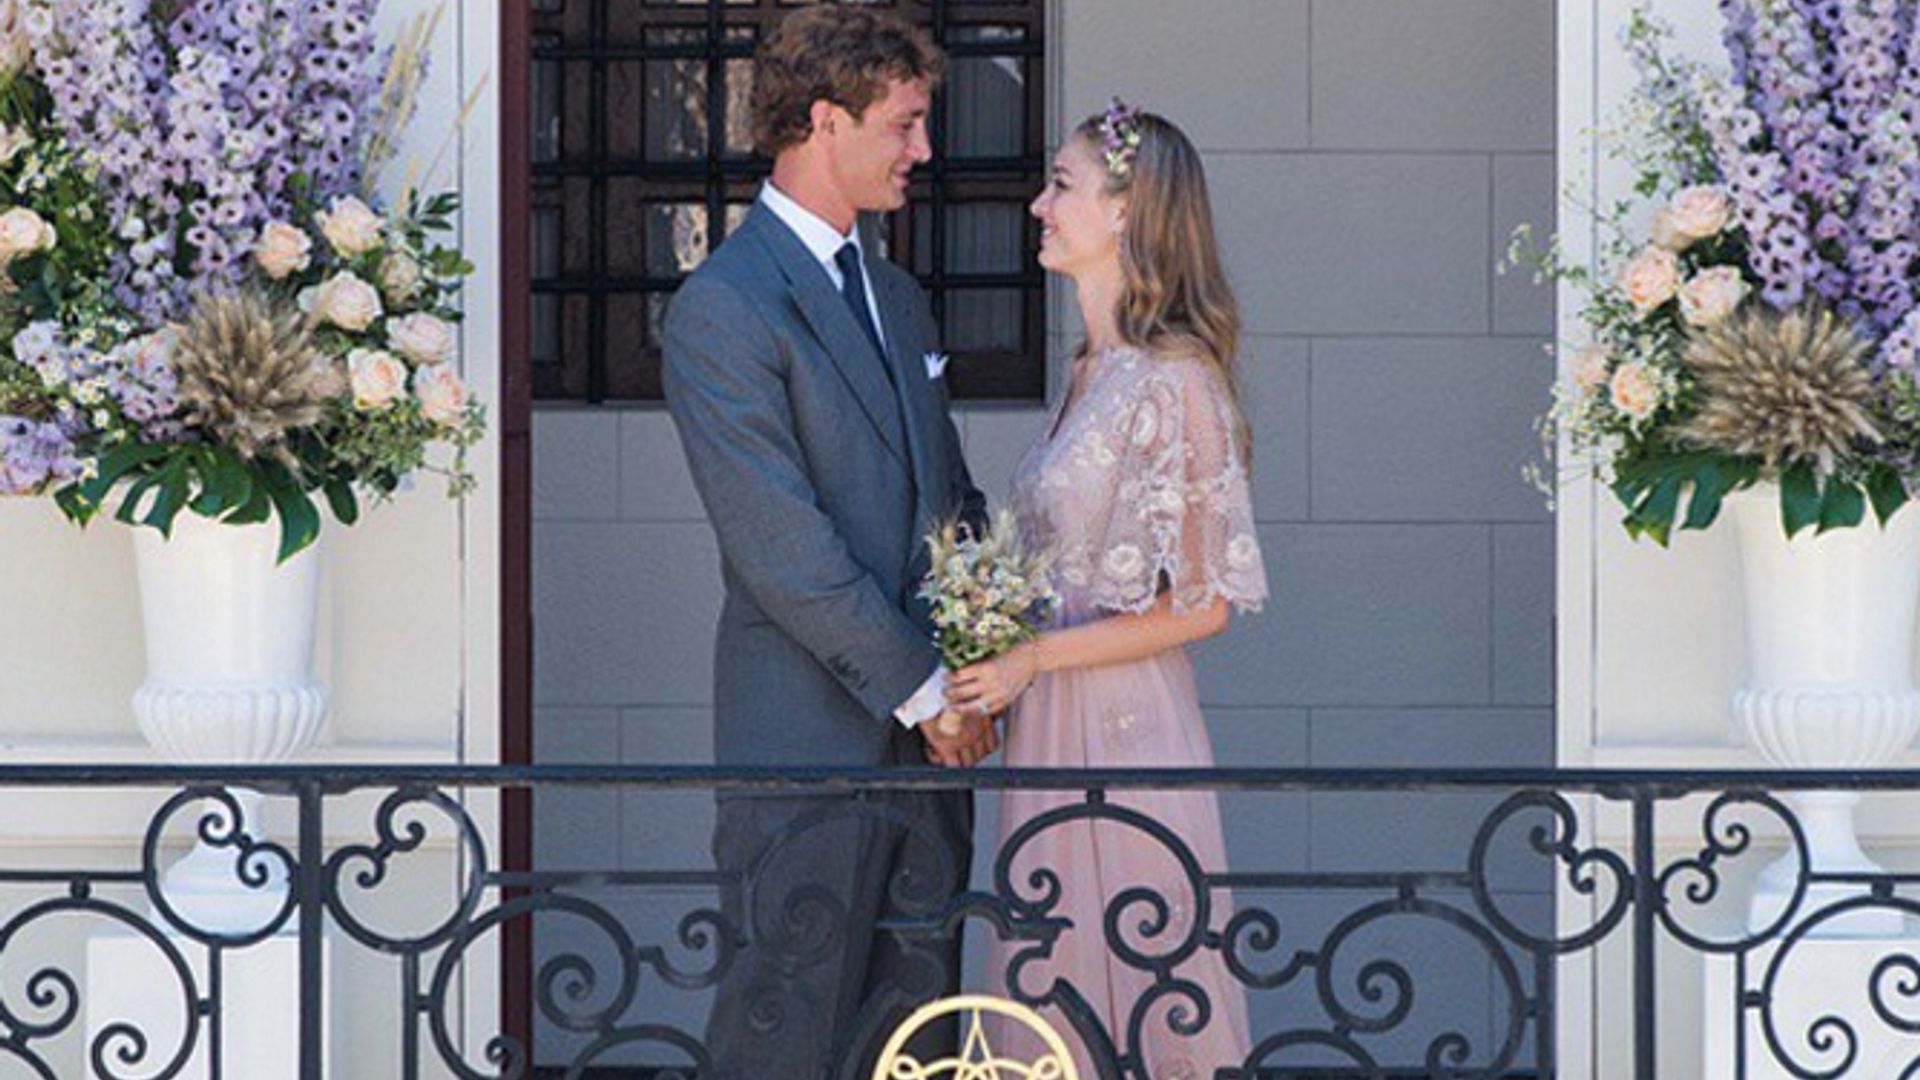 Pierre Casiraghi and Beatrice Borromeo's 2nd wedding in Italy: all the details